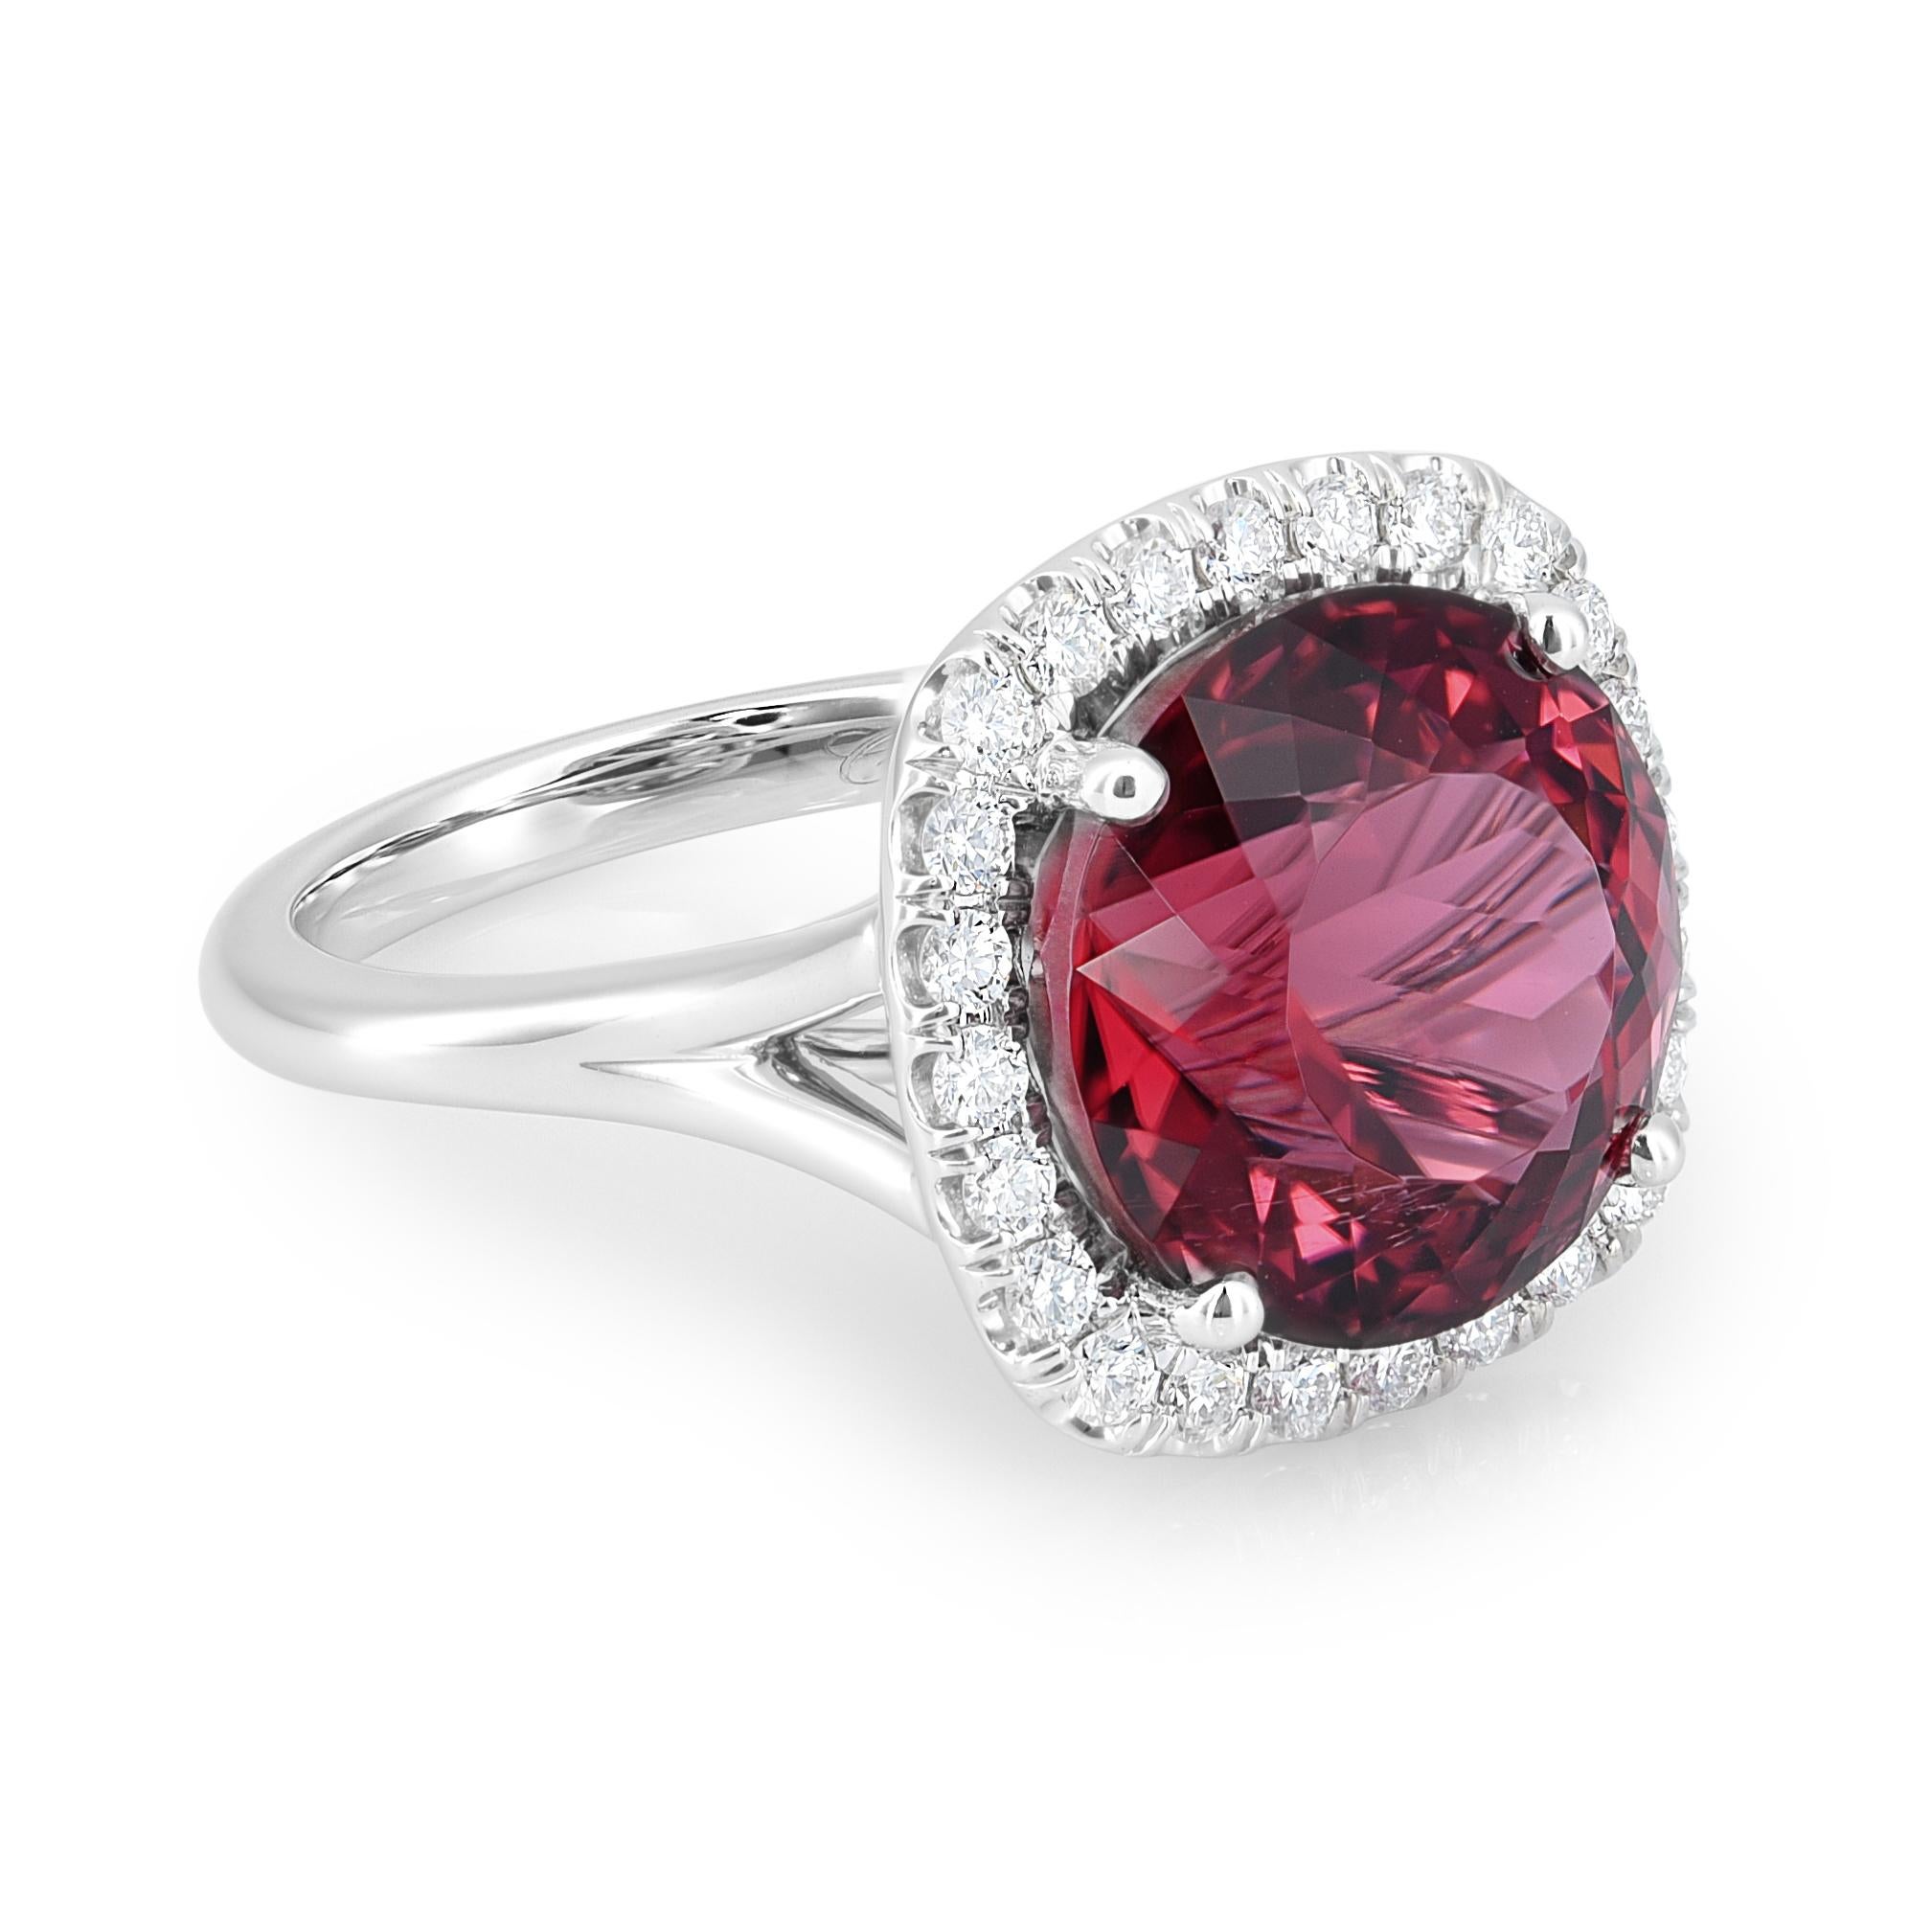 Embark on a journey of discovery with a captivating jewelry piece featuring a 10.25 carats Natural Red Tourmaline. Set in 14K white gold, the round-shaped gem, measuring 12.90 x 12.88 x 9.73 mm, takes center stage. The design is further elevated